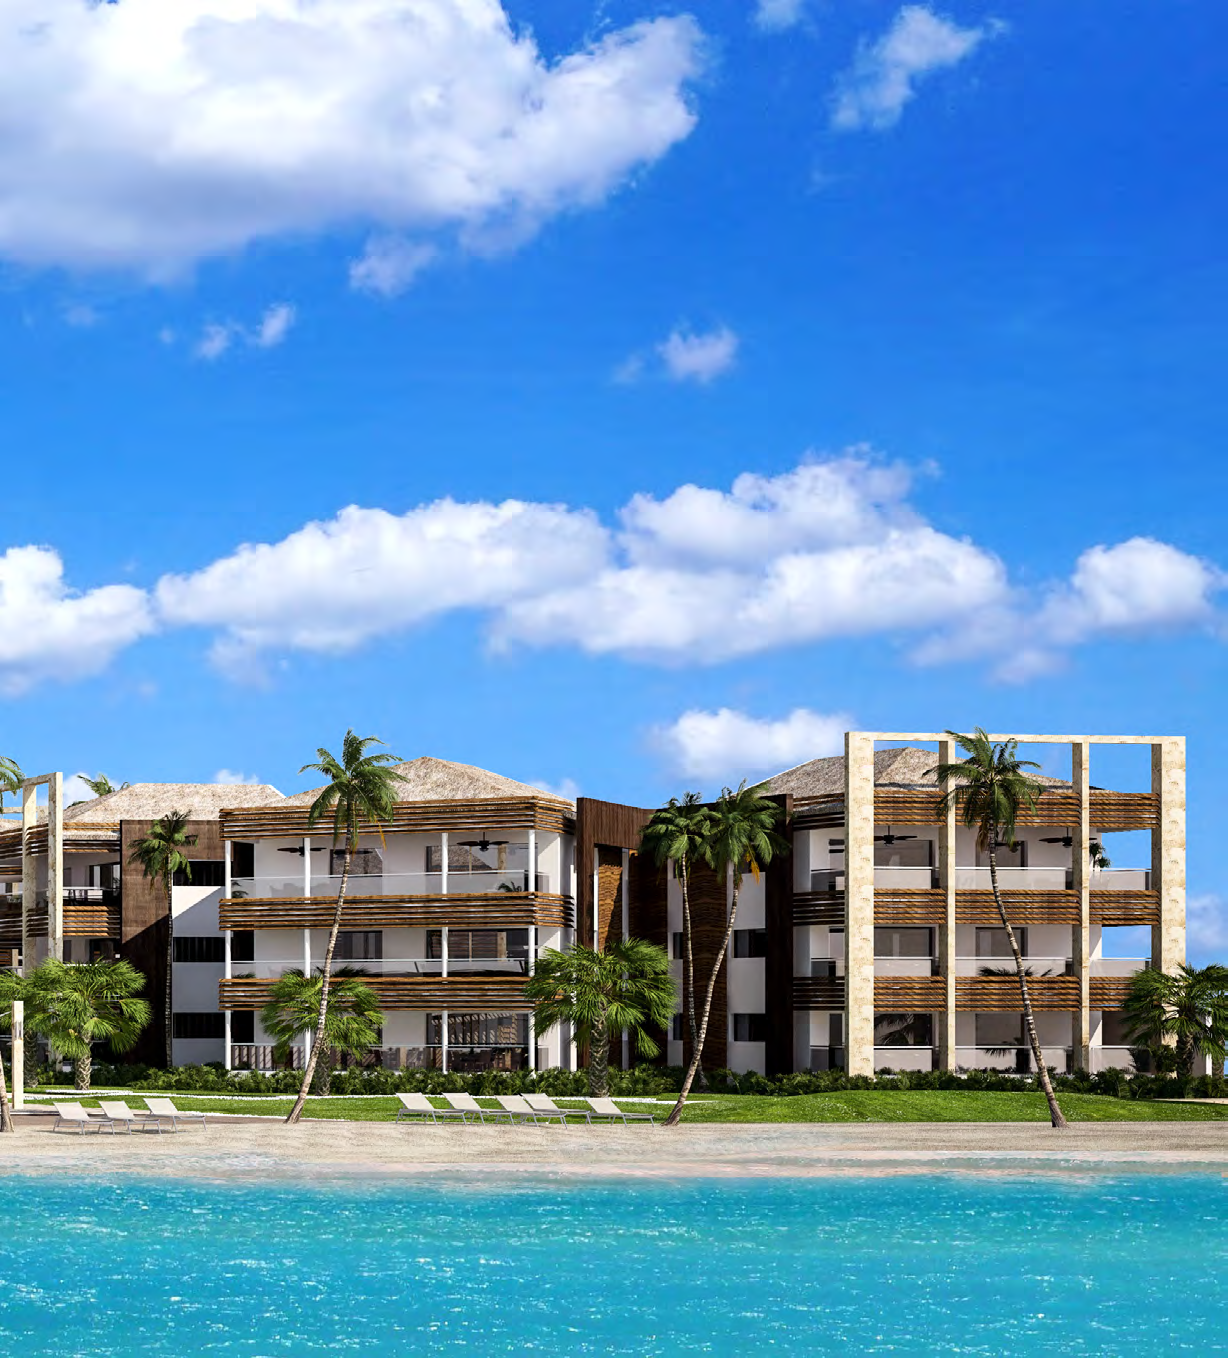 393 LINEAL FEET OF BEACH FRONT Placed upon 393 feet of beachfront and 6 acres of beautifully landscaped gardens lies BLUE BEACH PUNTA CANA.